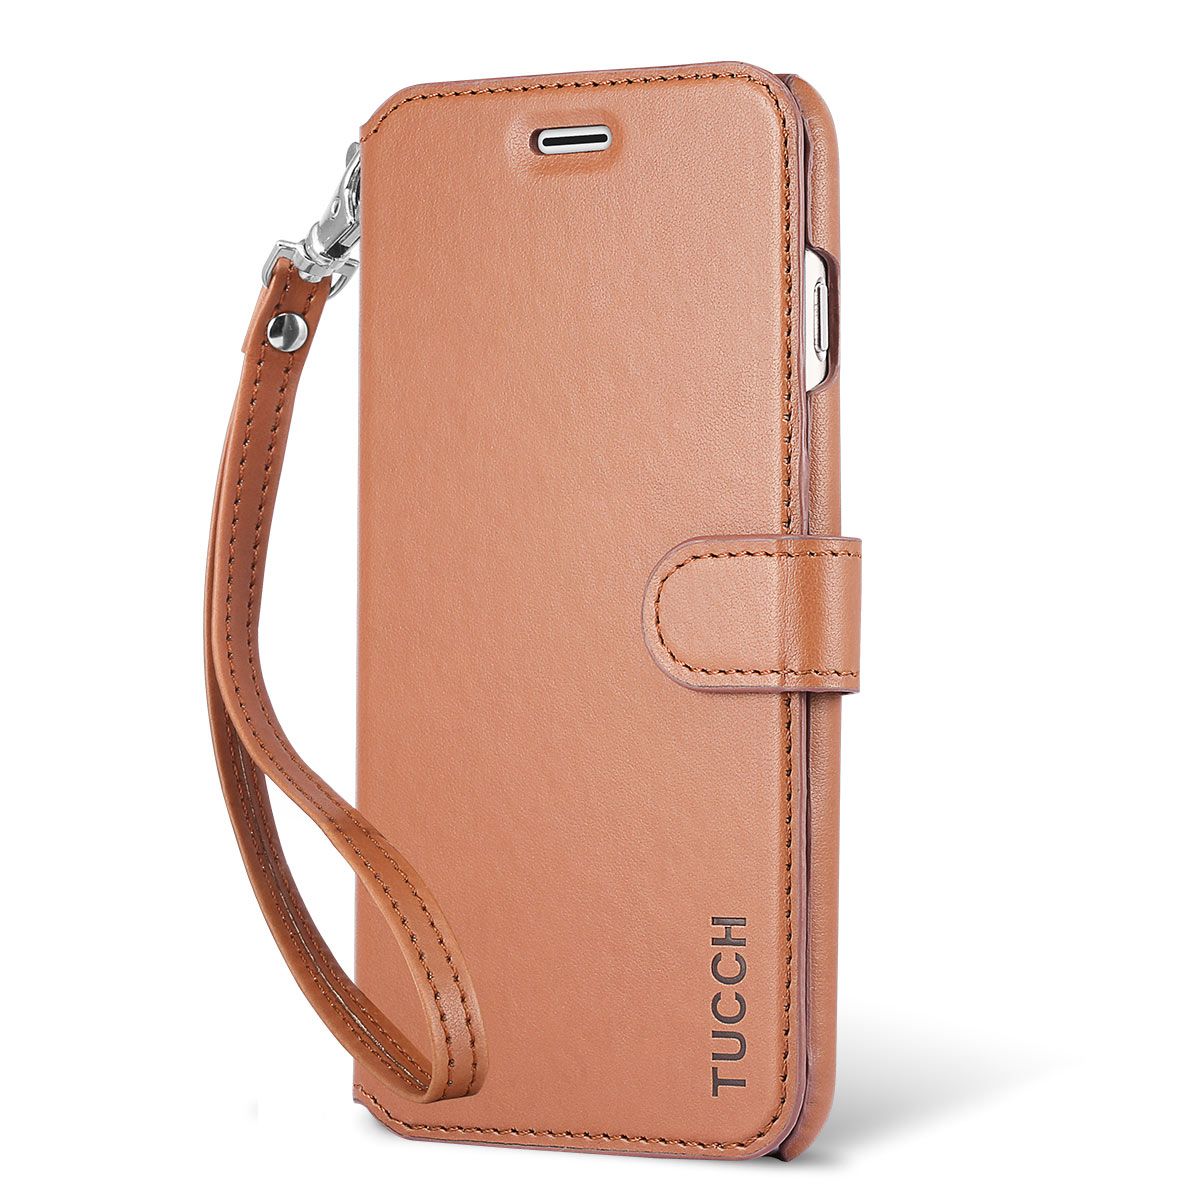 Huella - Printed Phone Case with Strap for iPhone 6 / 6S / 6 Plus